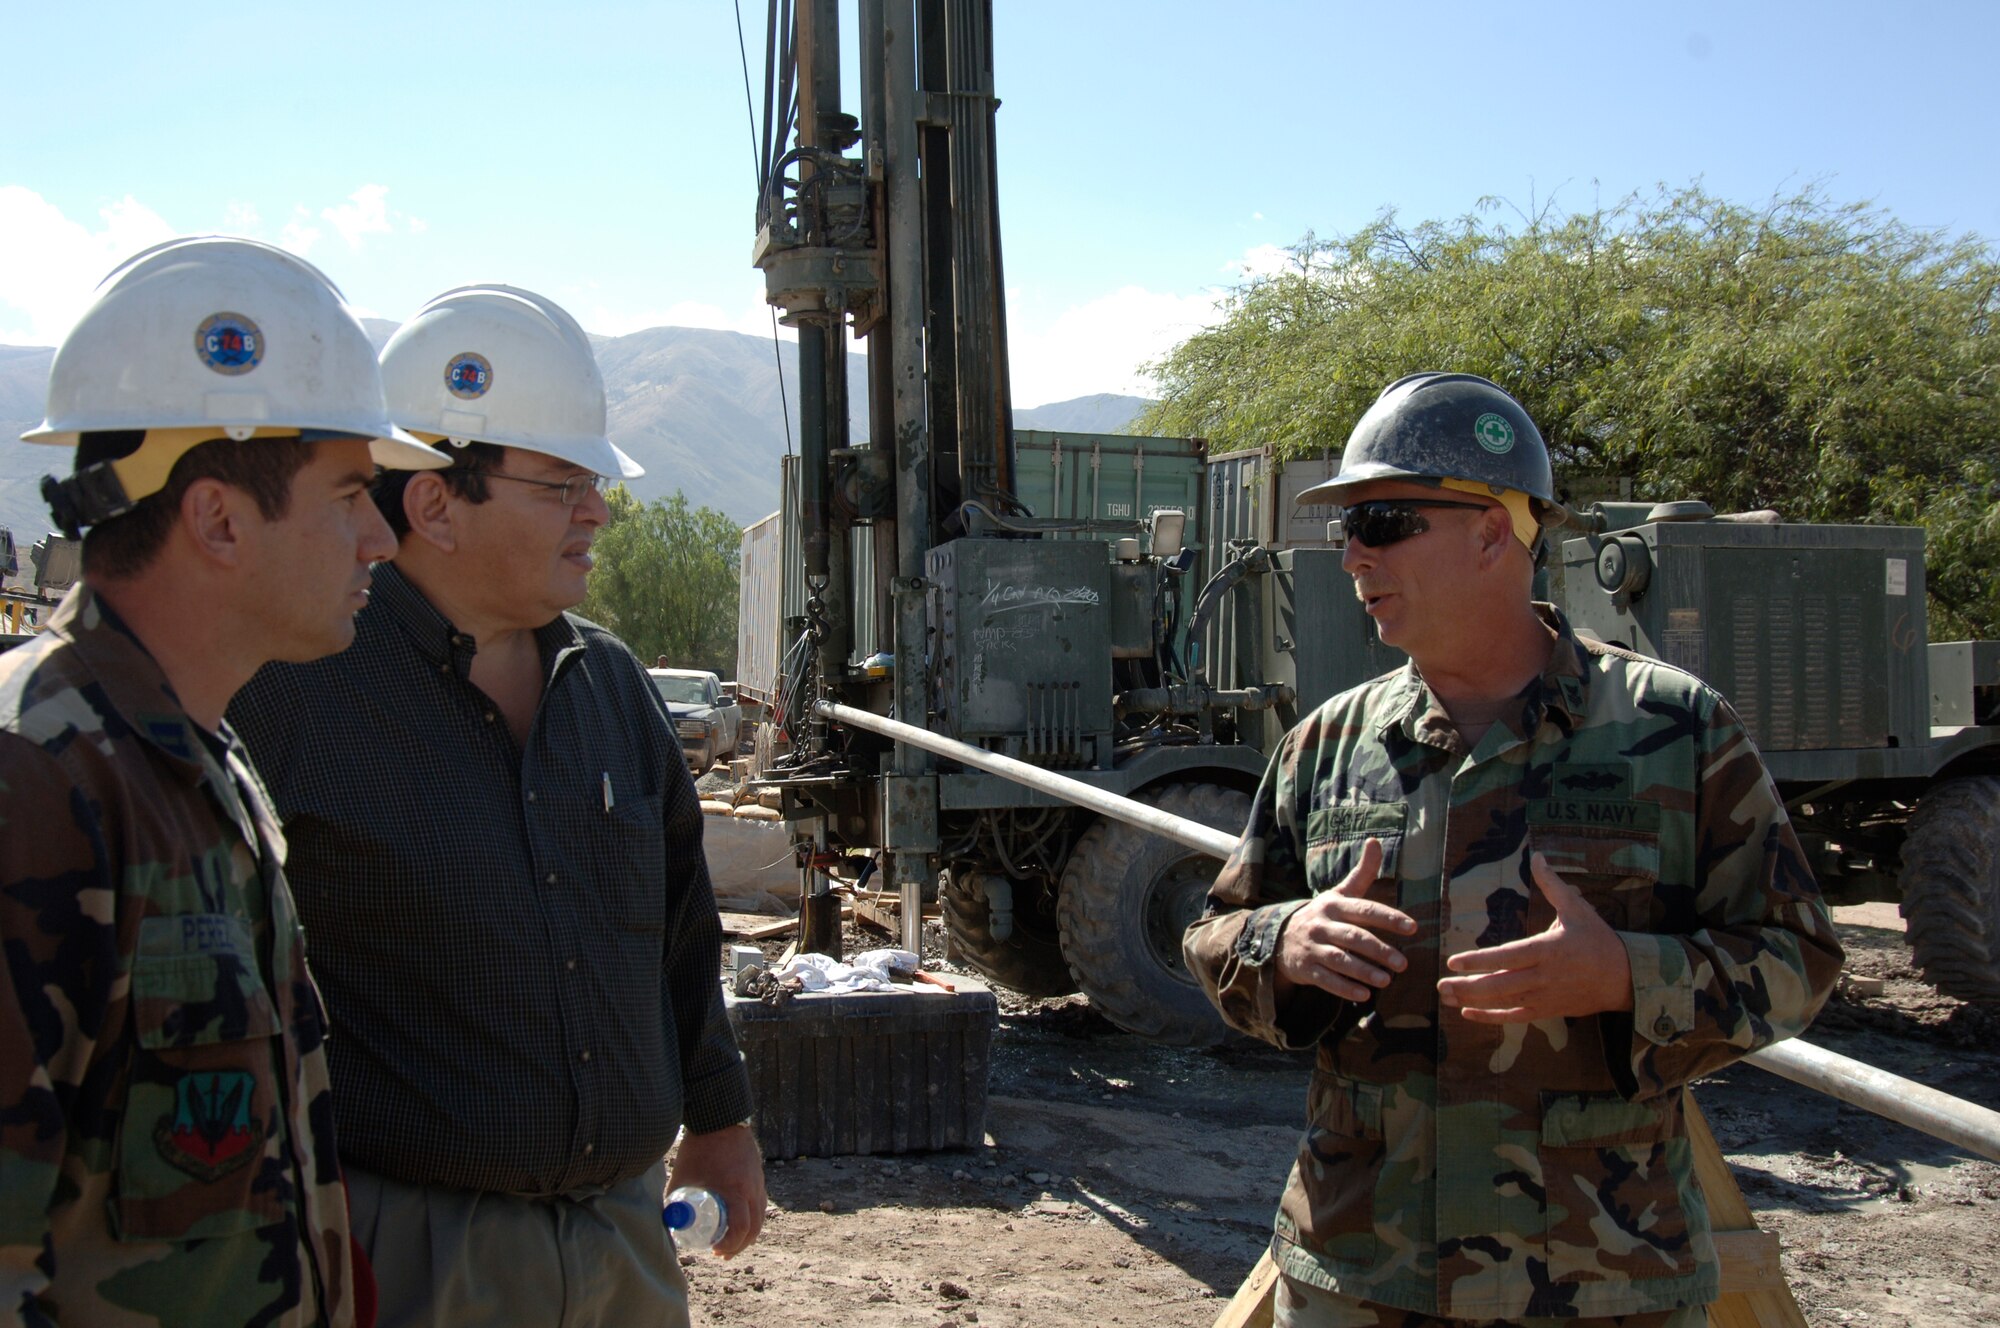 Petty Officer 1st Class Mark Goff, Task Force New Horizons lead driller, explains the Navy Seabee's well-drilling progress at Luricocha, Peru, July 13, to Dr. Luis Cabeña, Chief of Staff to the Peruvian Ministry of Defense.  The Seabees are supporting New Horizons - Peru 2008, a partnered effort between the U.S. and Peru to bring relief to underprivileged Peruvians. (U.S. Air Force Photo/1st Lt. Mary Pekas) 